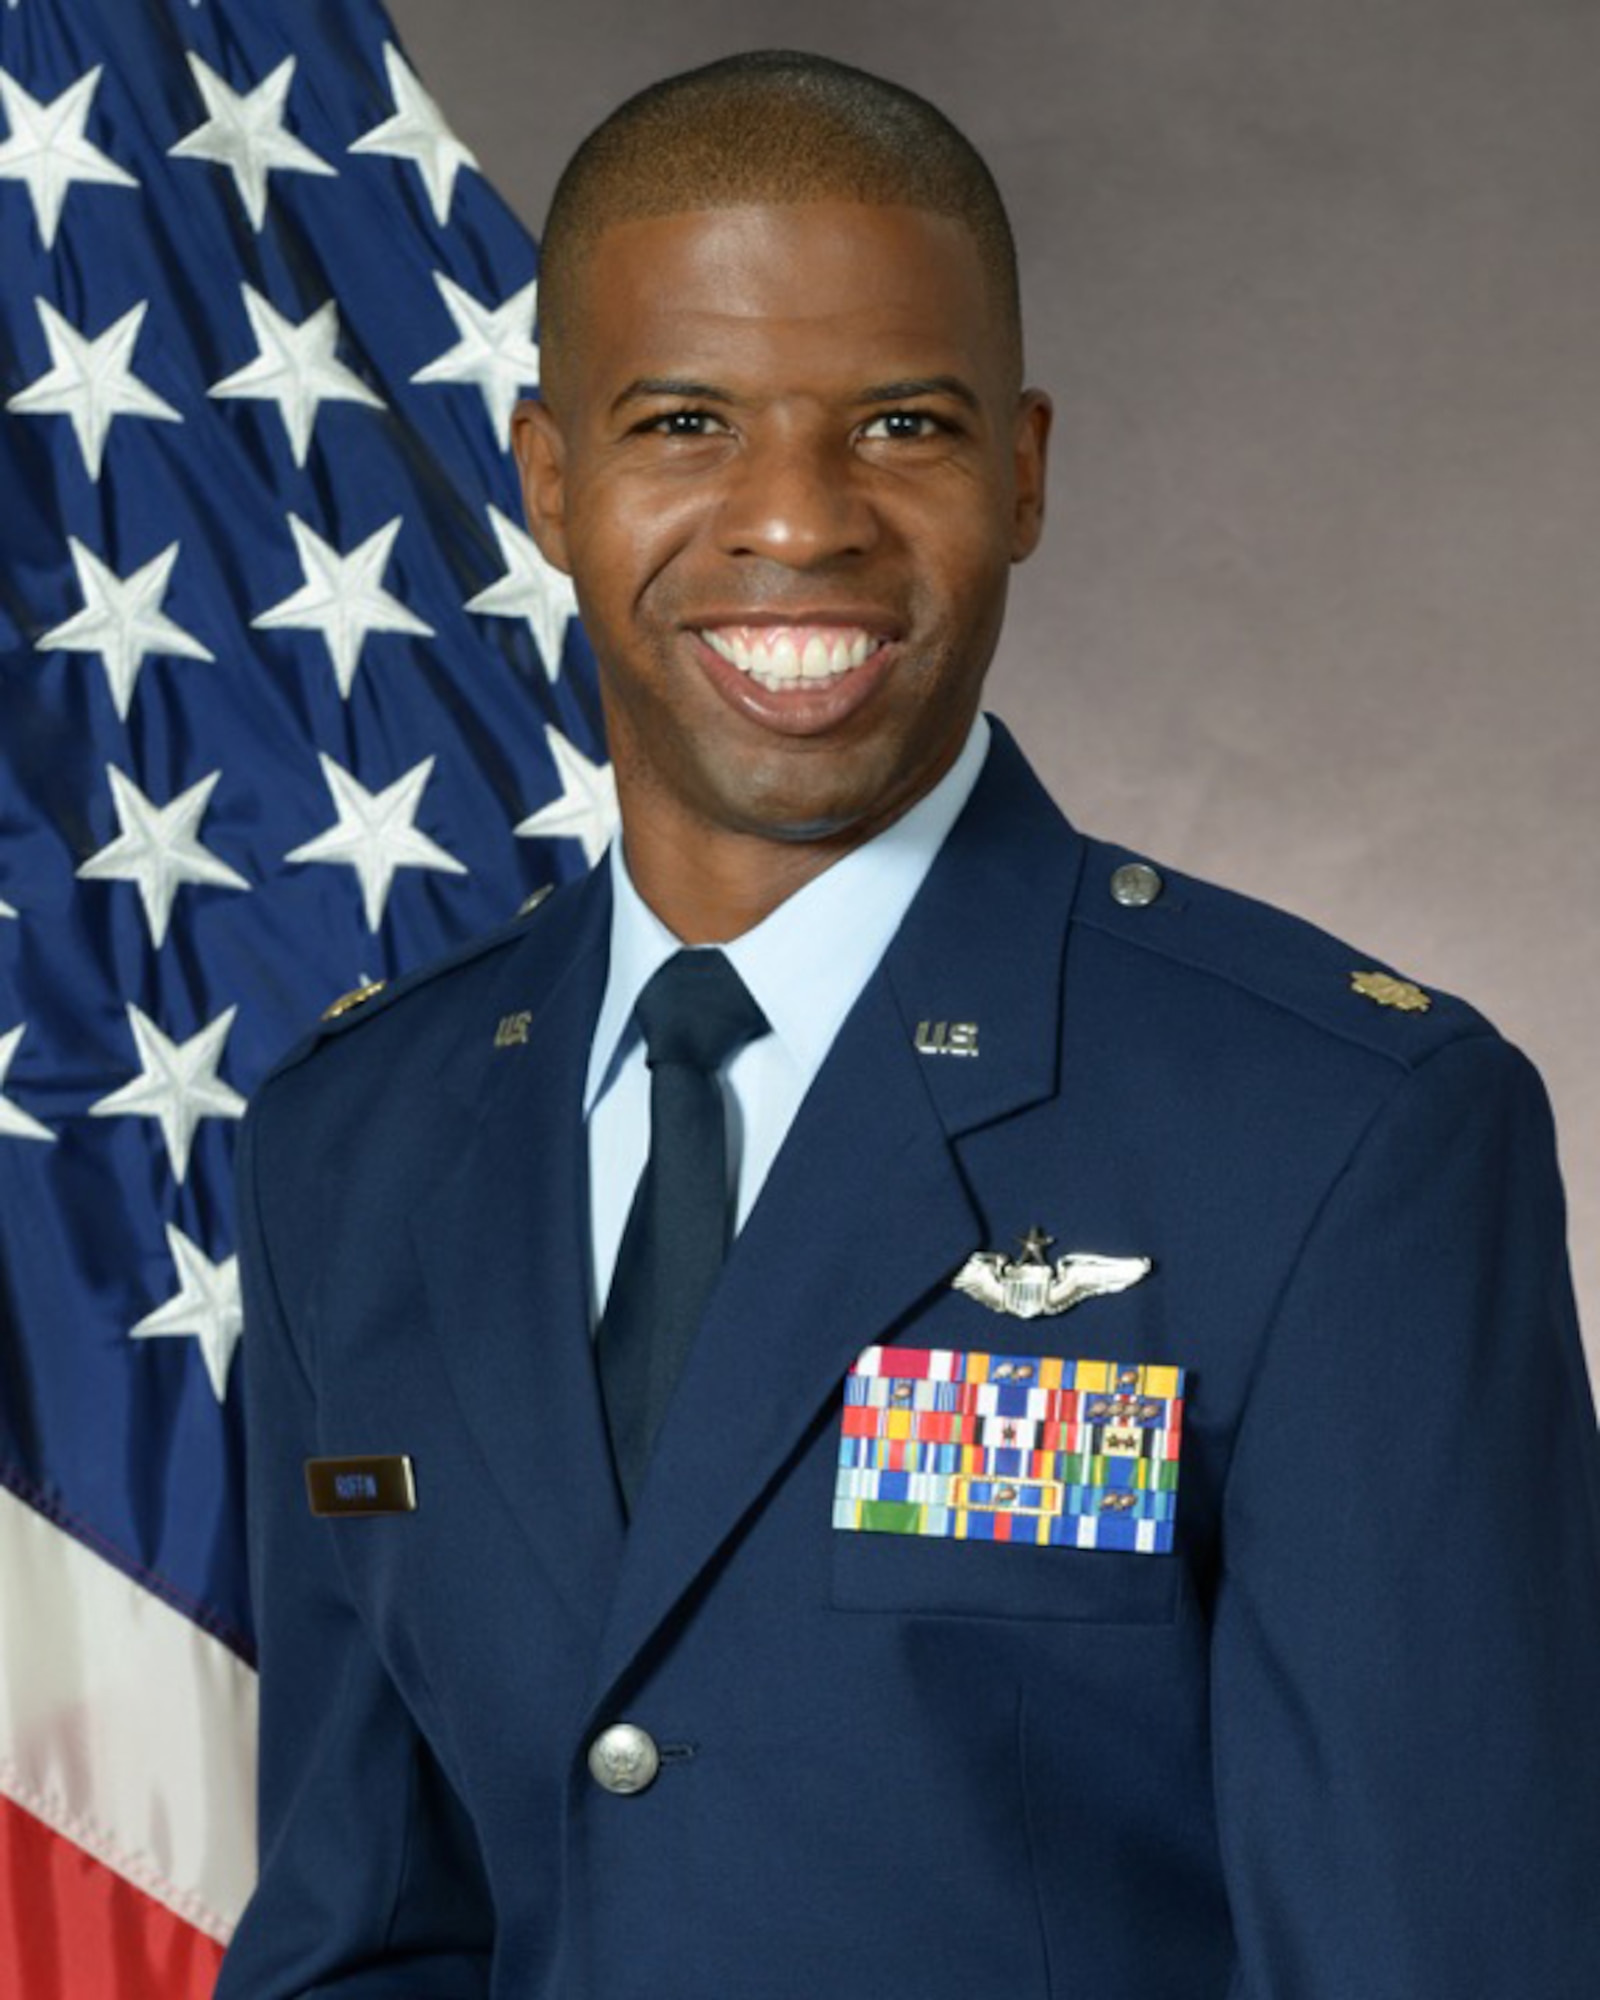 Maj. Kenyatta Ruffin is the founder of Legacy Flight Academy, a non-profit organization that assists minority youths in pursuing careers in aviation and raising awareness about benefits and opportunities in the military. He will be recognized live at the BET awards, June 26, during the “Shine a Light” segment. 